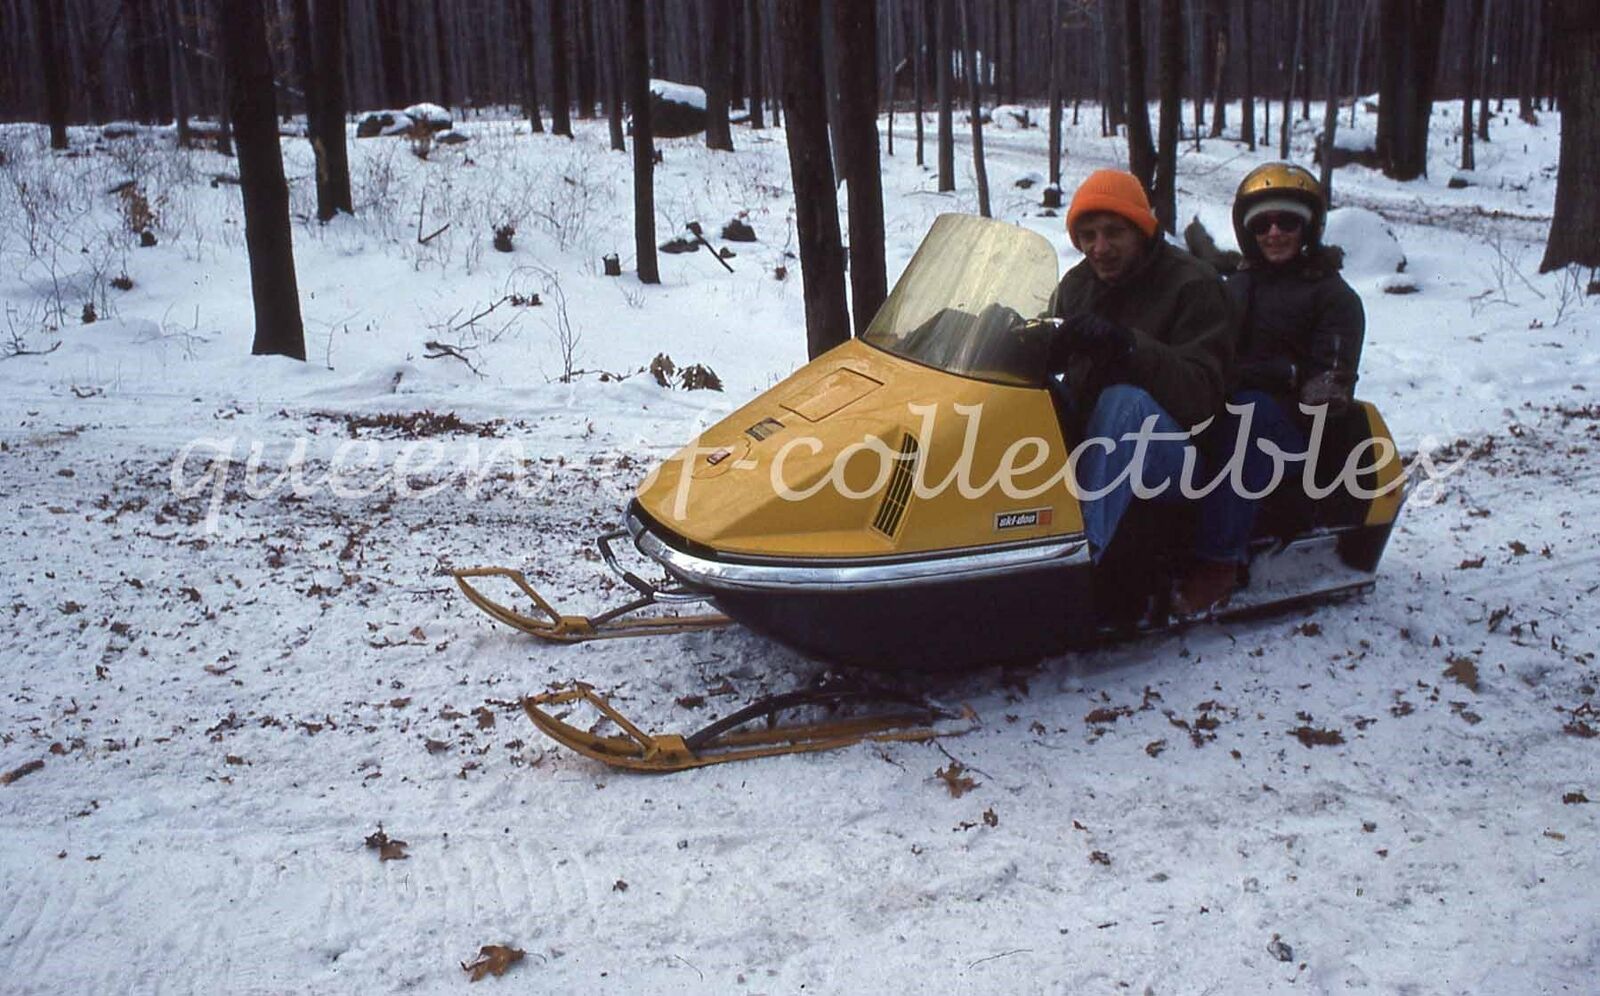 1977 Ski Doo Snowmobile with Riders Bright Yellow Vintage Color Slide